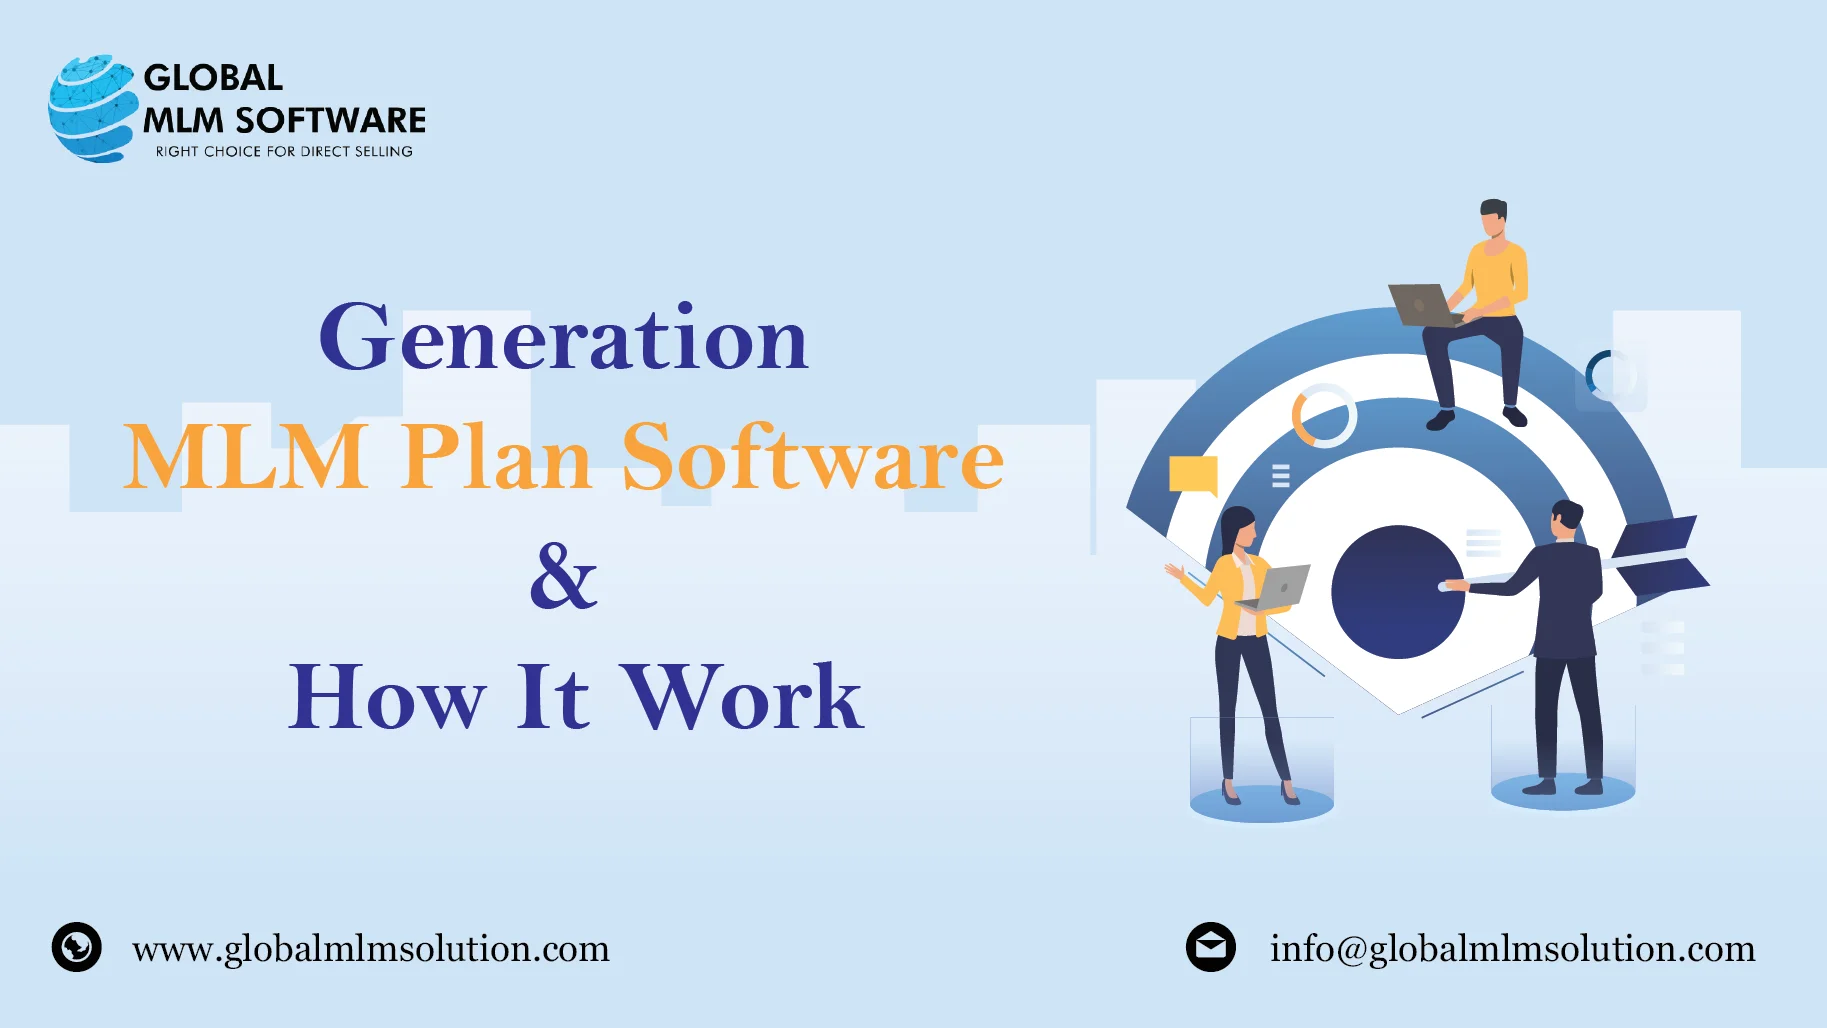 Generation MLM Plan Software & How it Work